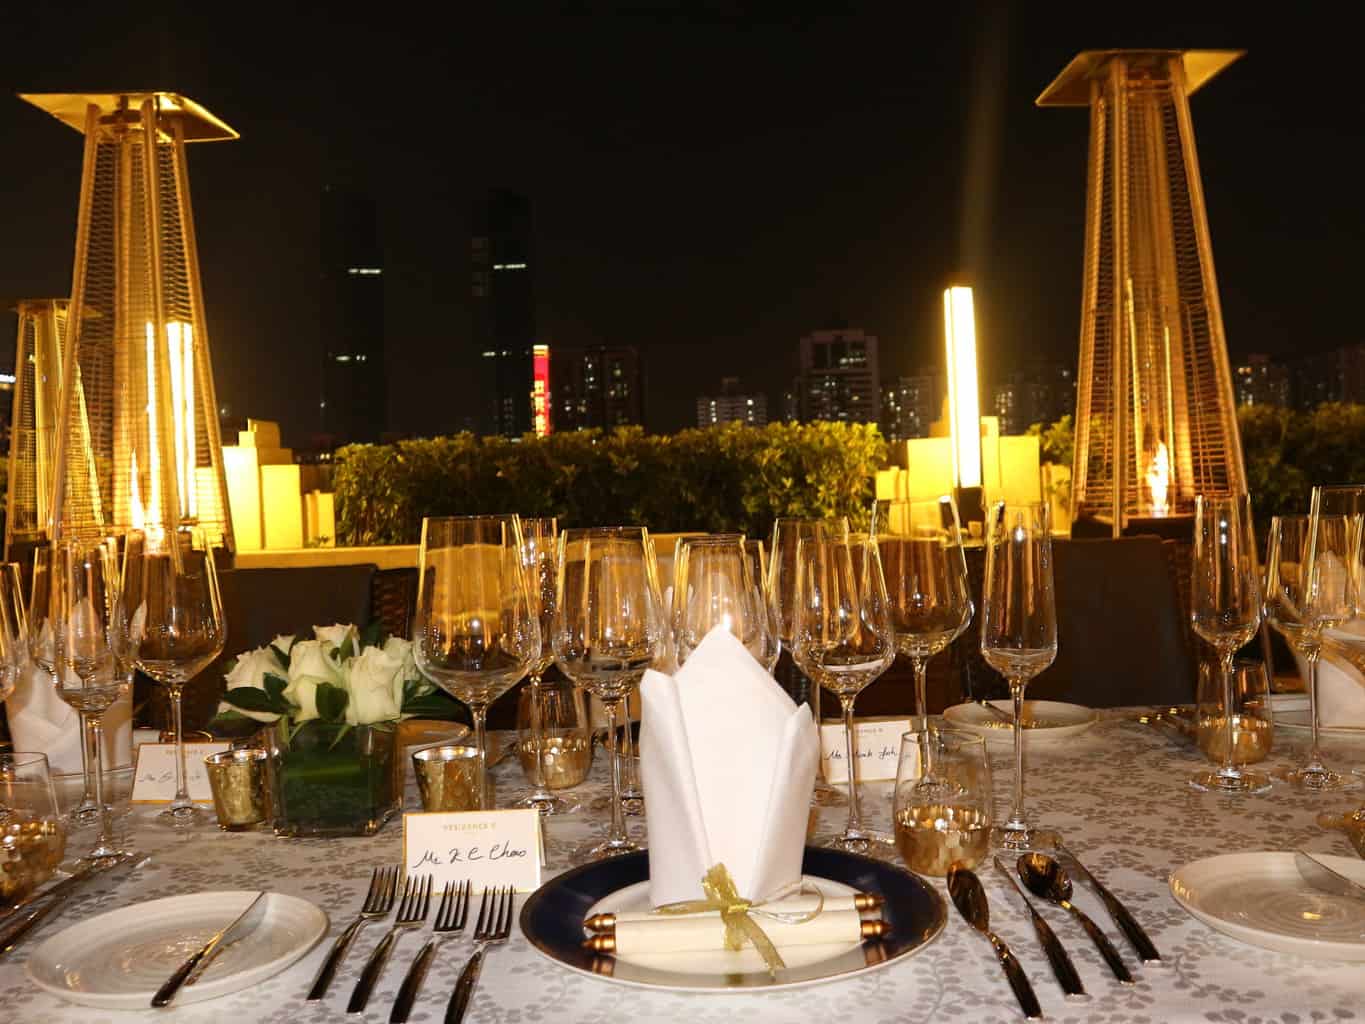 An exceptional six-hand chef dinner at Residence G Shenzhen